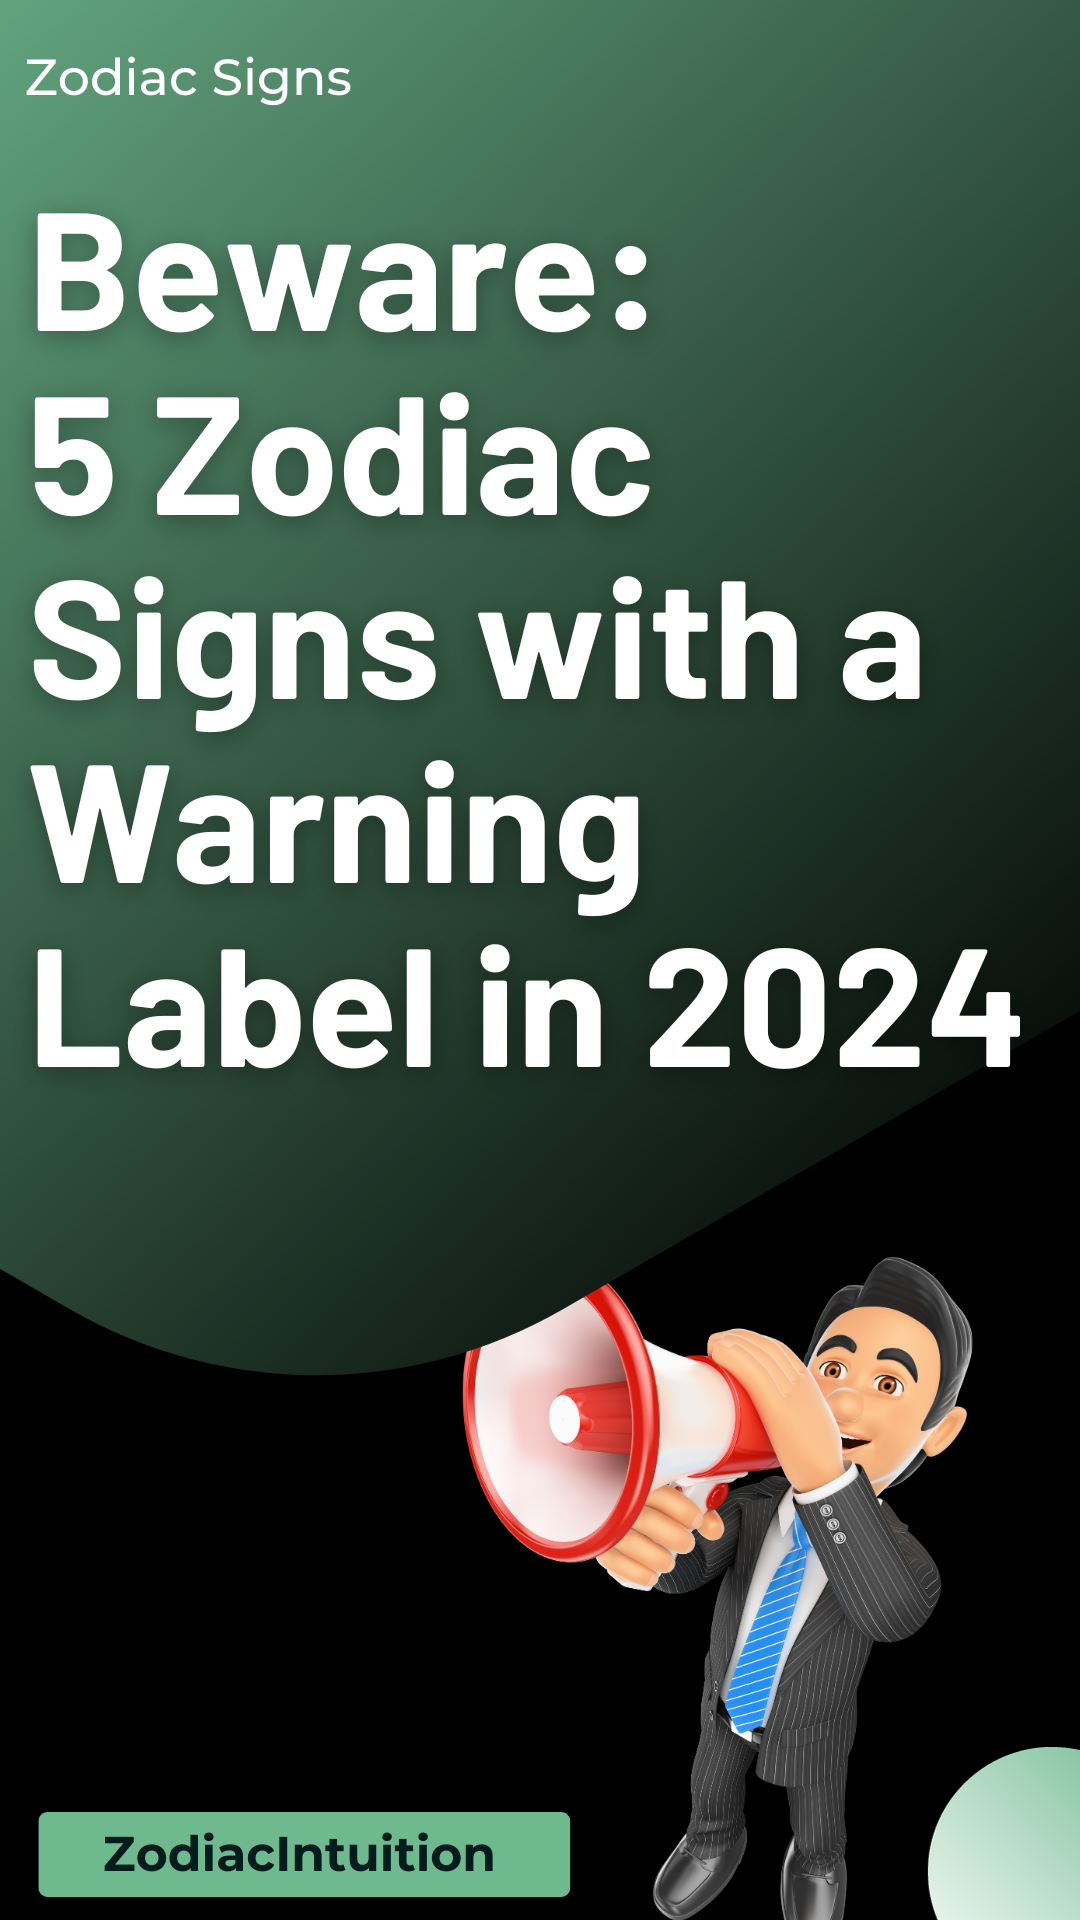 Beware: 5 Zodiac Signs with a Warning Label in 2024